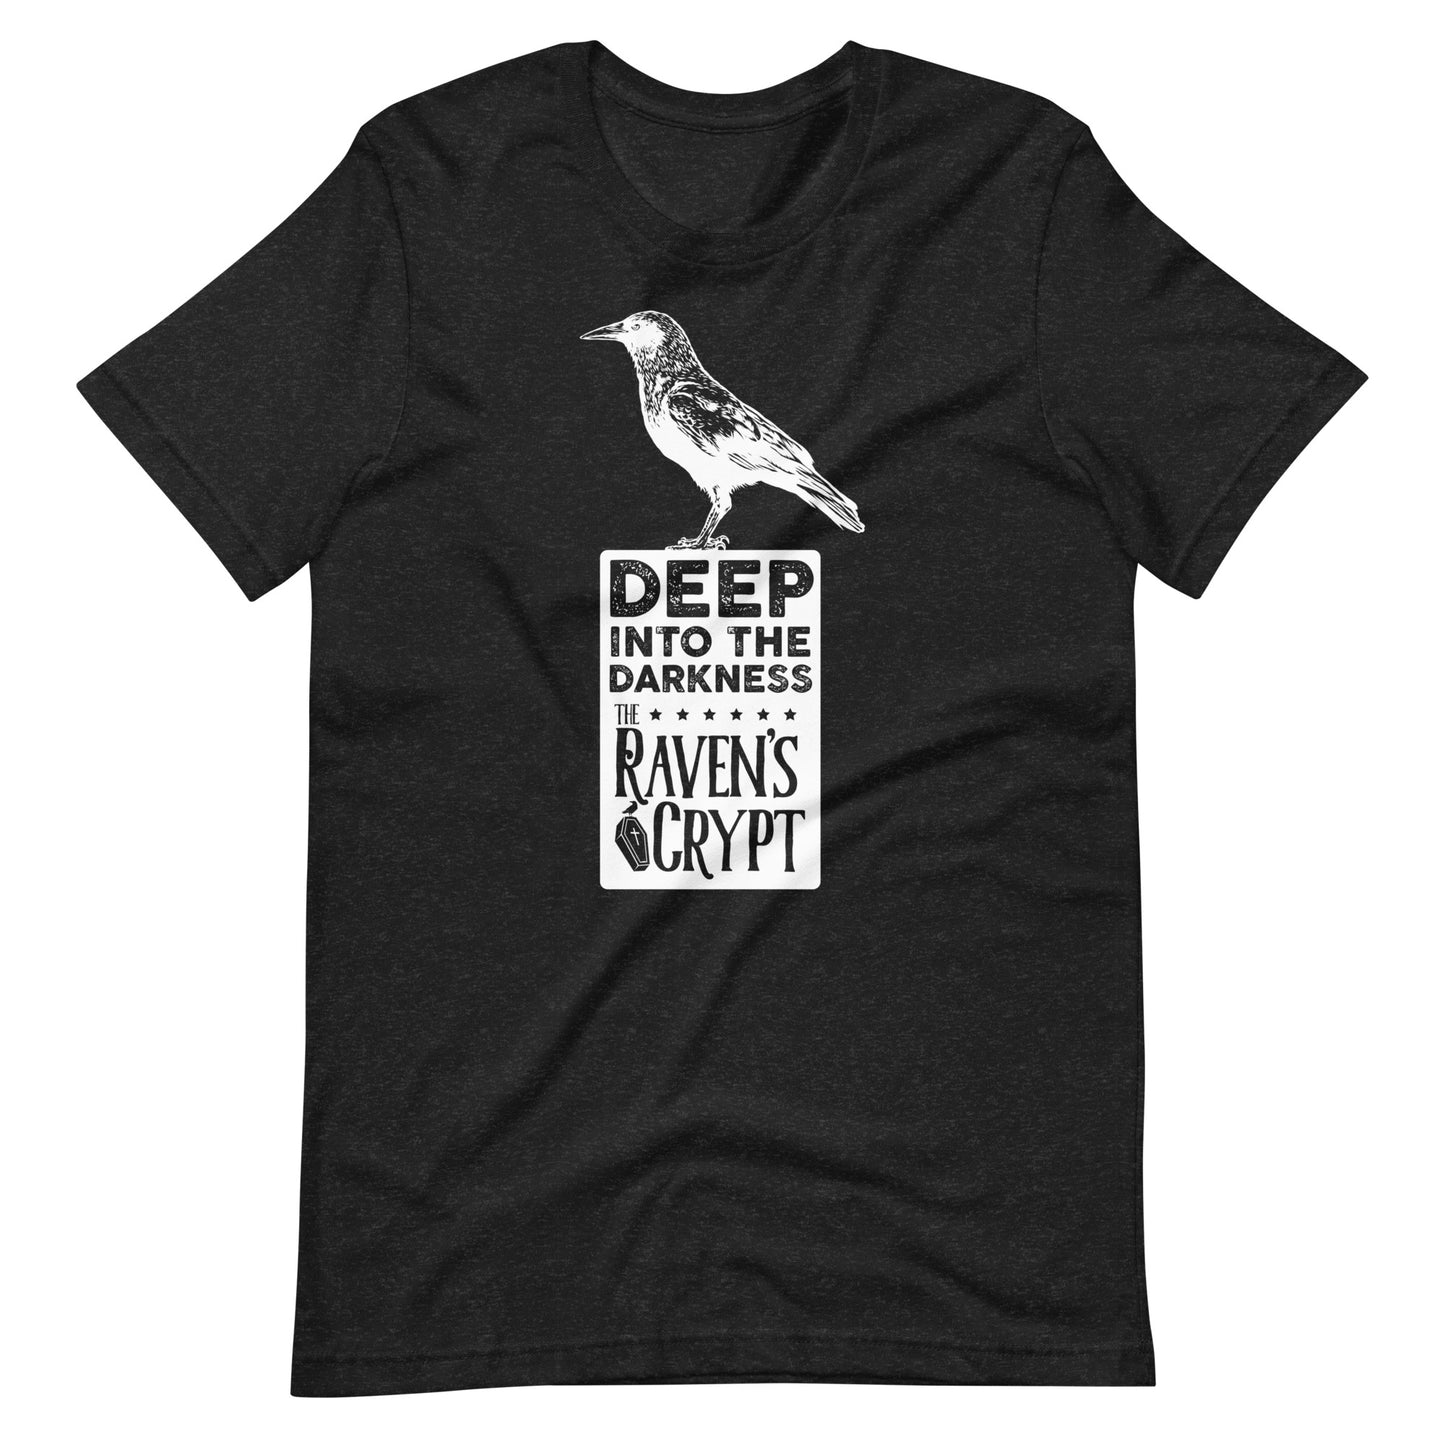 Deep Into the Darkness Crypt 2 - Men's t-shirt - Black Heather Front